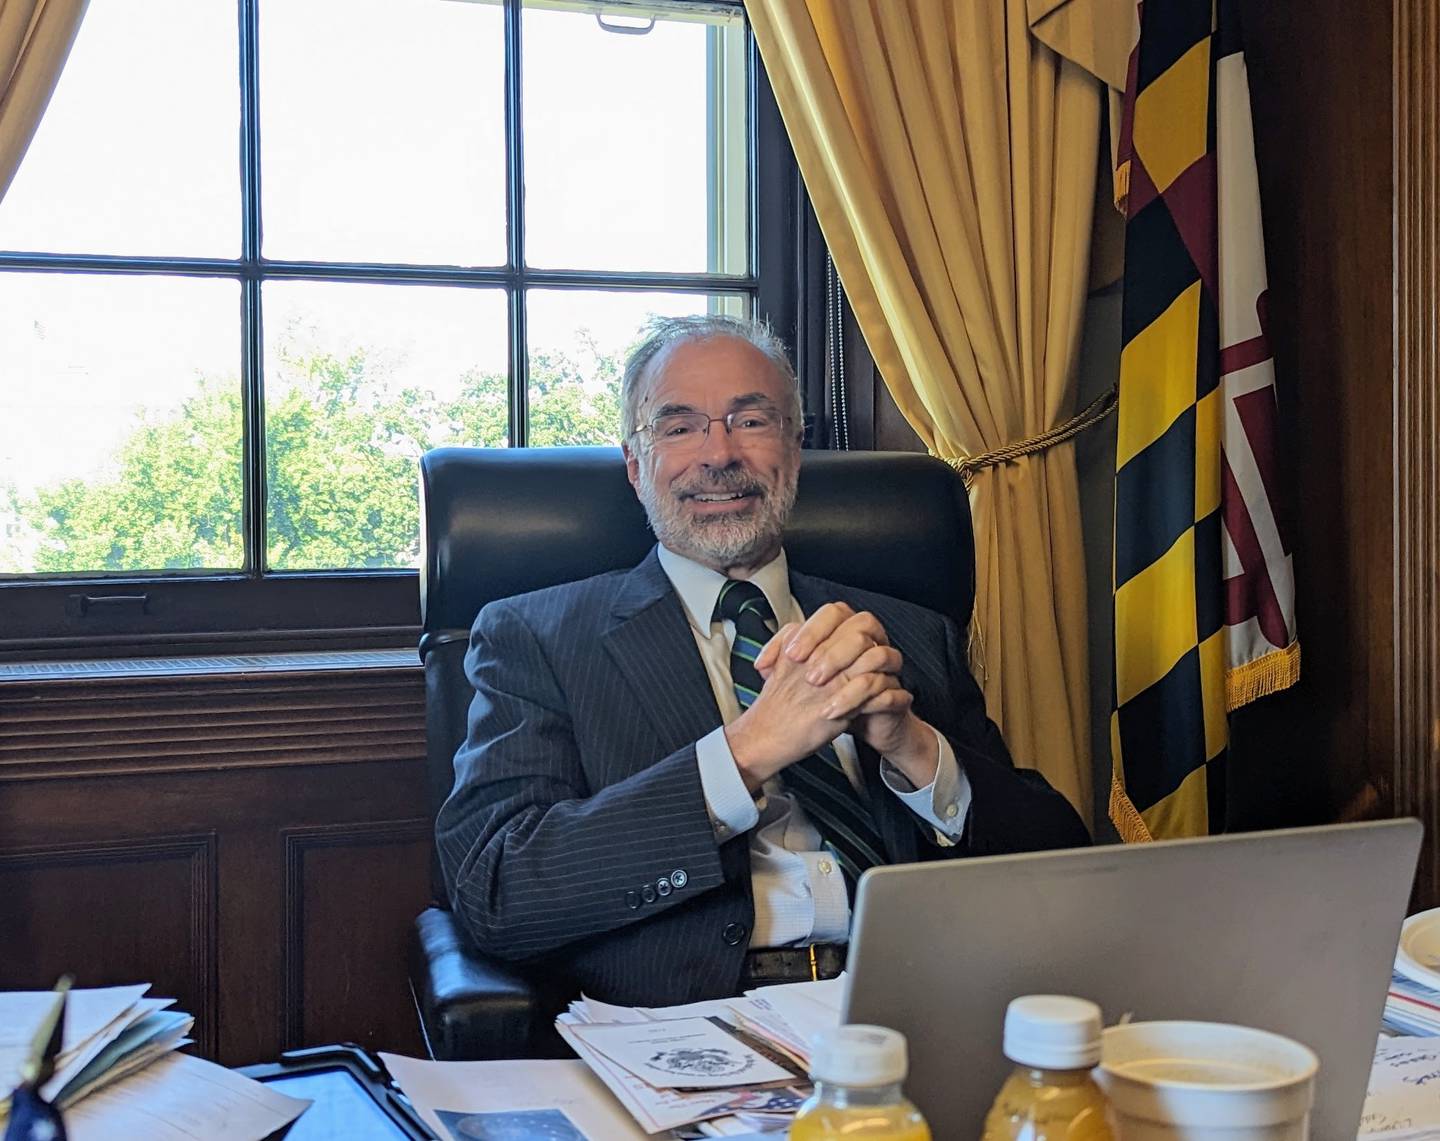 U.S. Rep. Andy Harris, R-Maryland, talks about the impasses in selecting a new speaker Thursday at his office on Capitol Hill.